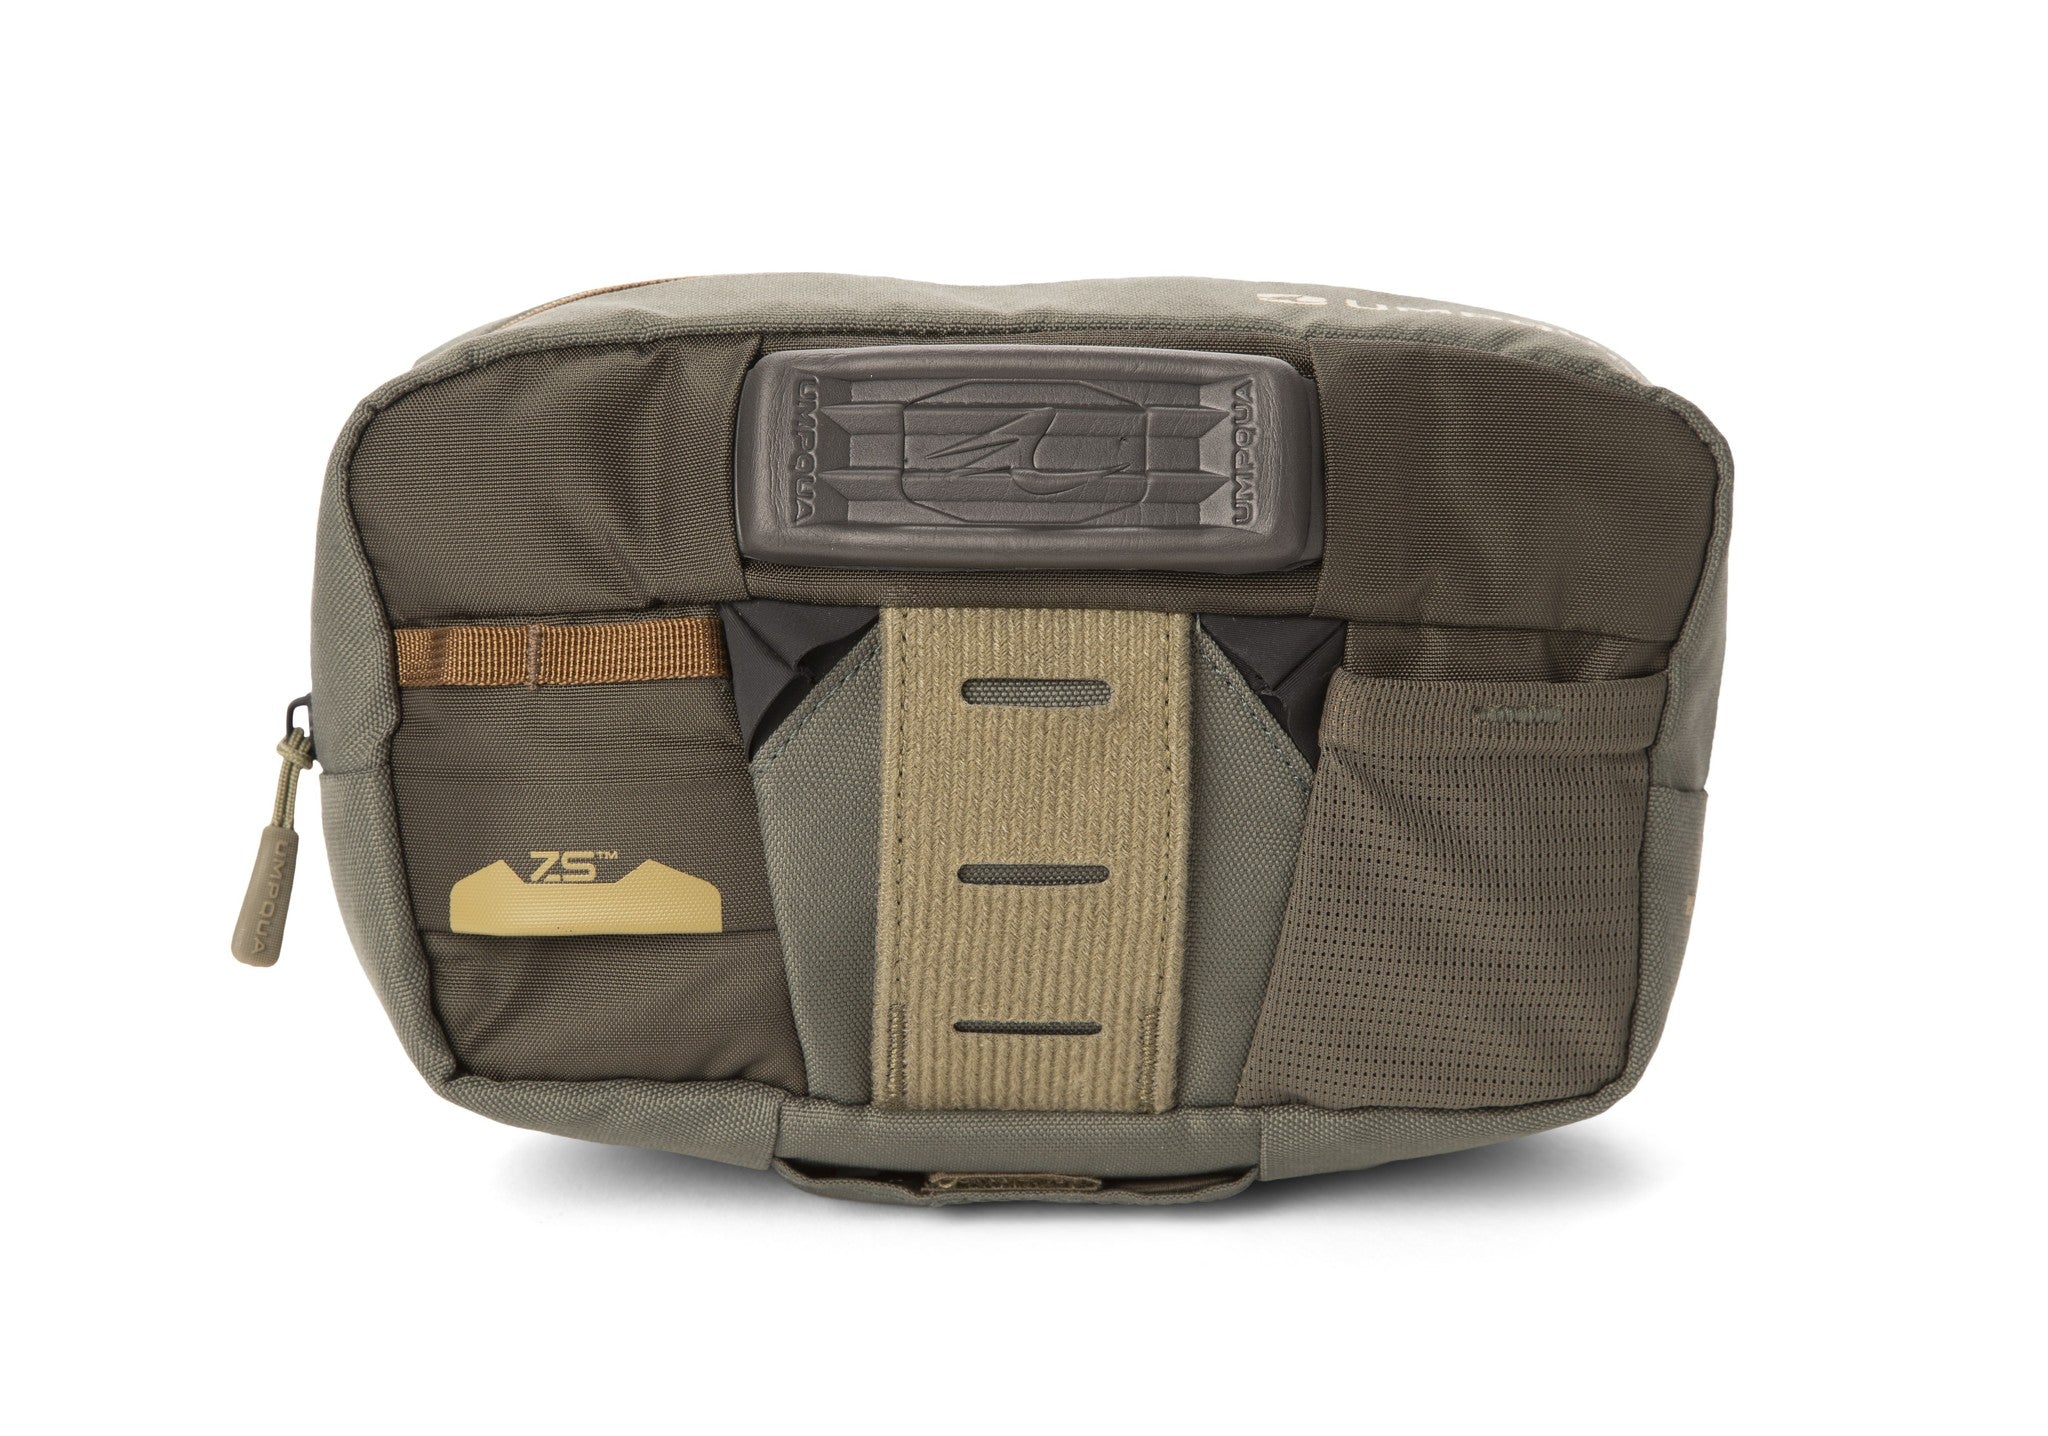 Zs2 Wader Chest Pack